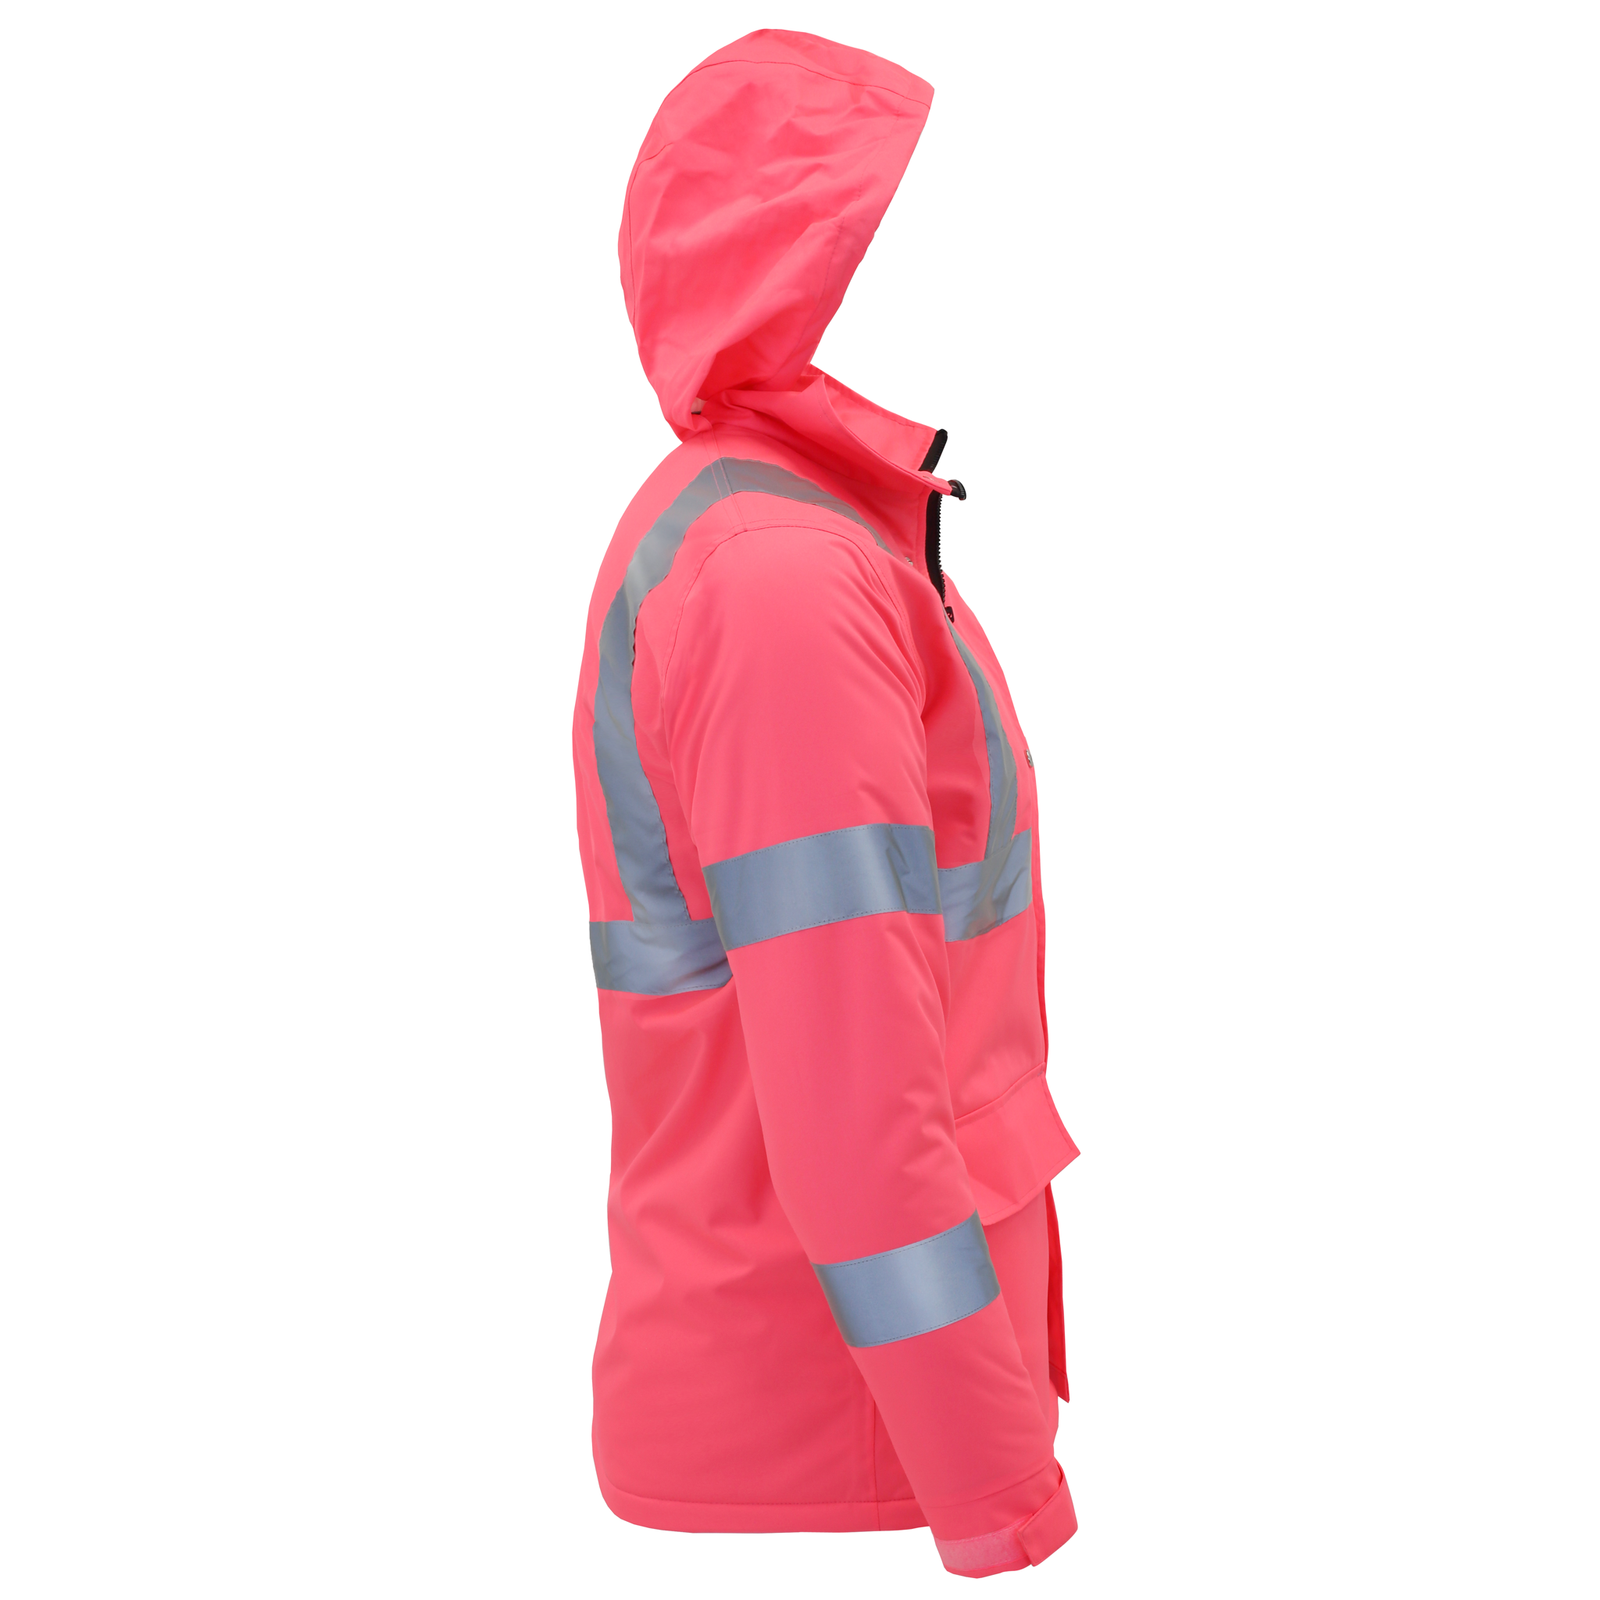 Side view of the Jorestech hi-vis safety jacket with reflective strips and hoodie for winter and rain protection